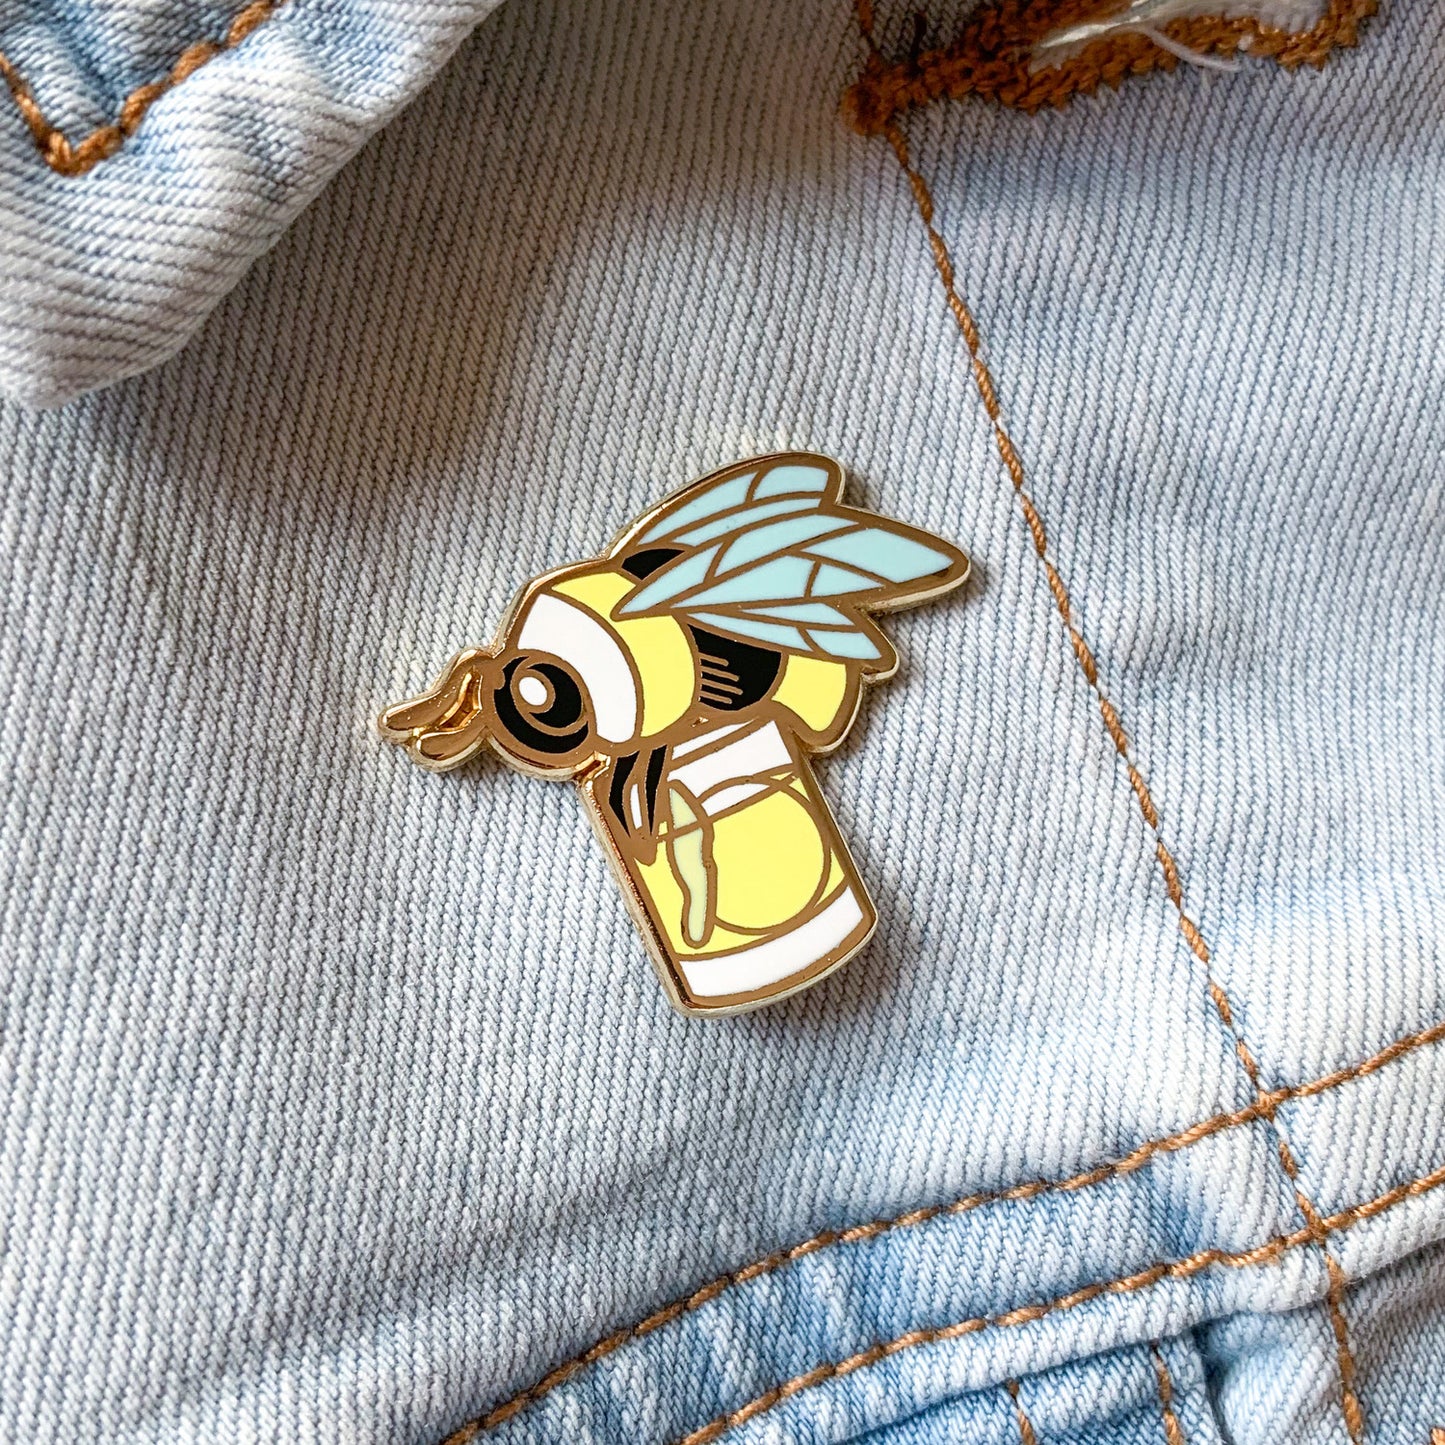 Bumblebee and Penicillin Cocktail Hard Enamel Pin by Cocktail Critters on Denim